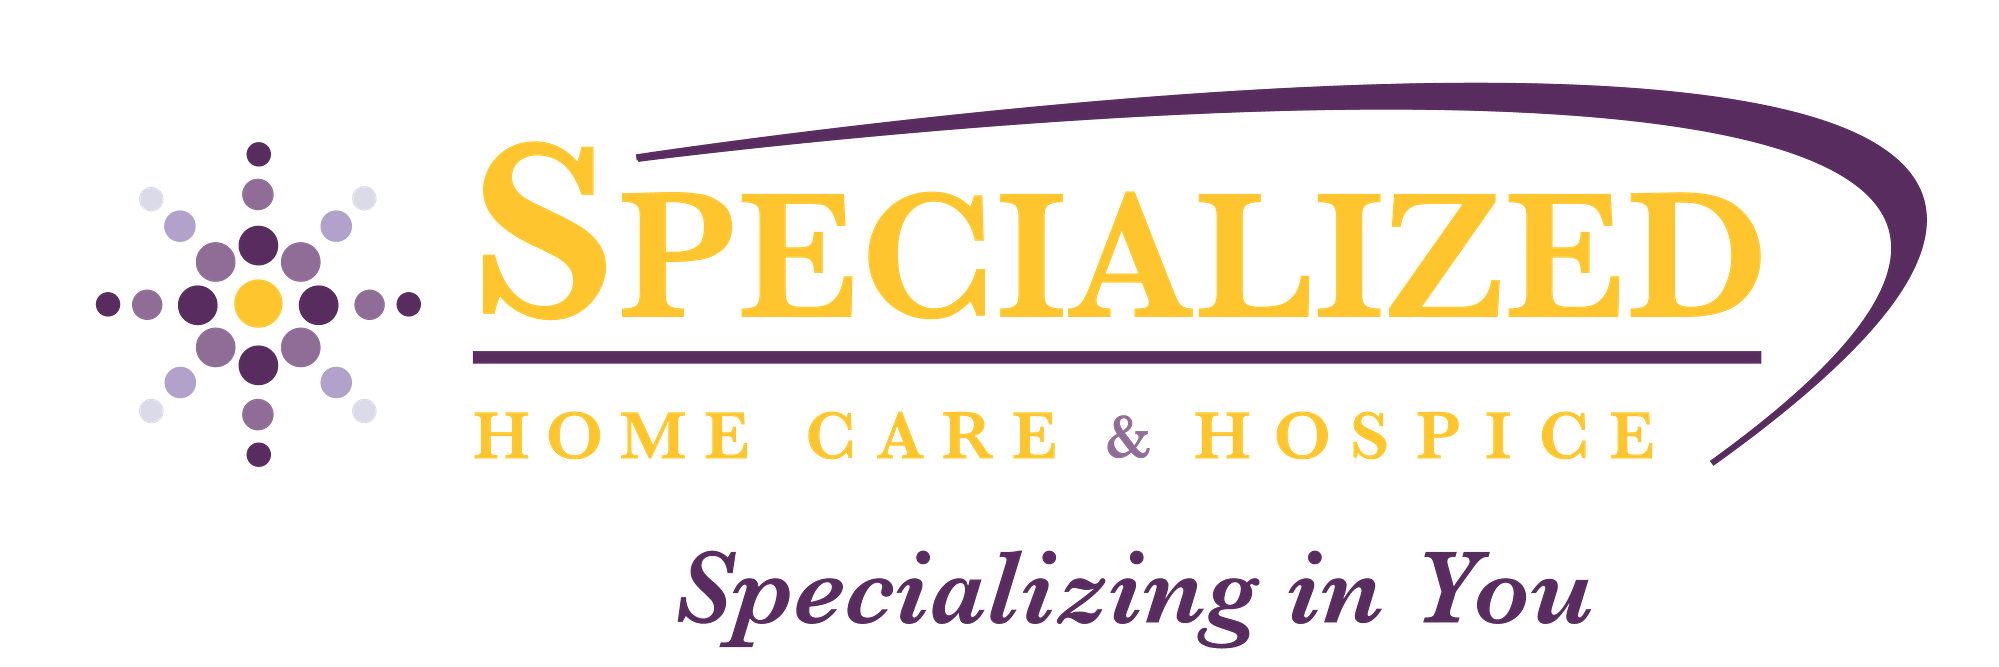 Specialized Home Care